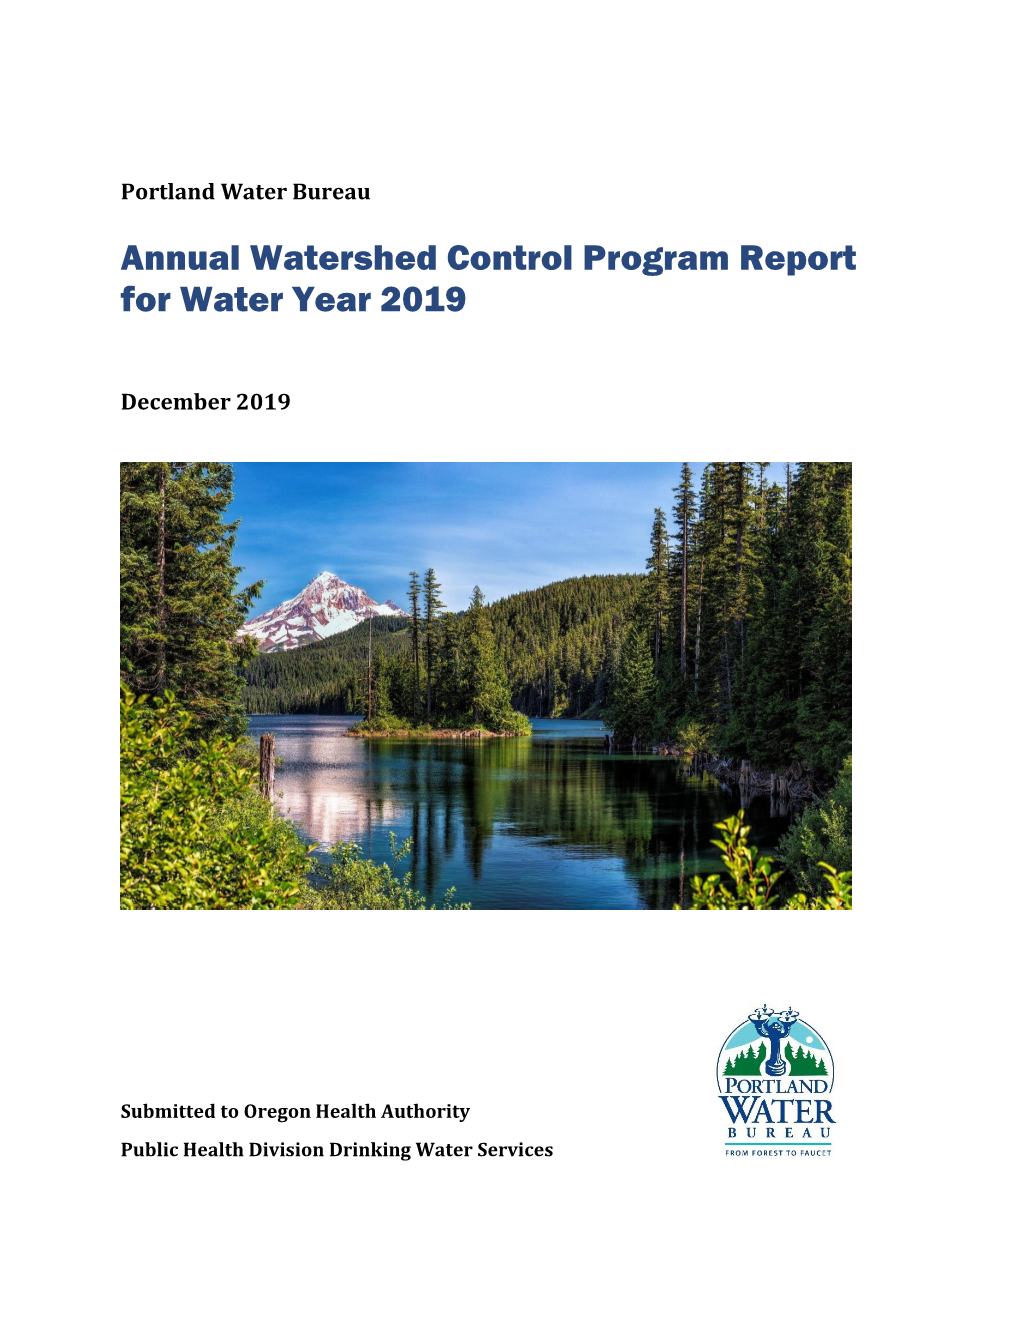 Download PDF File 2019 Annual Watershed Control Program Report